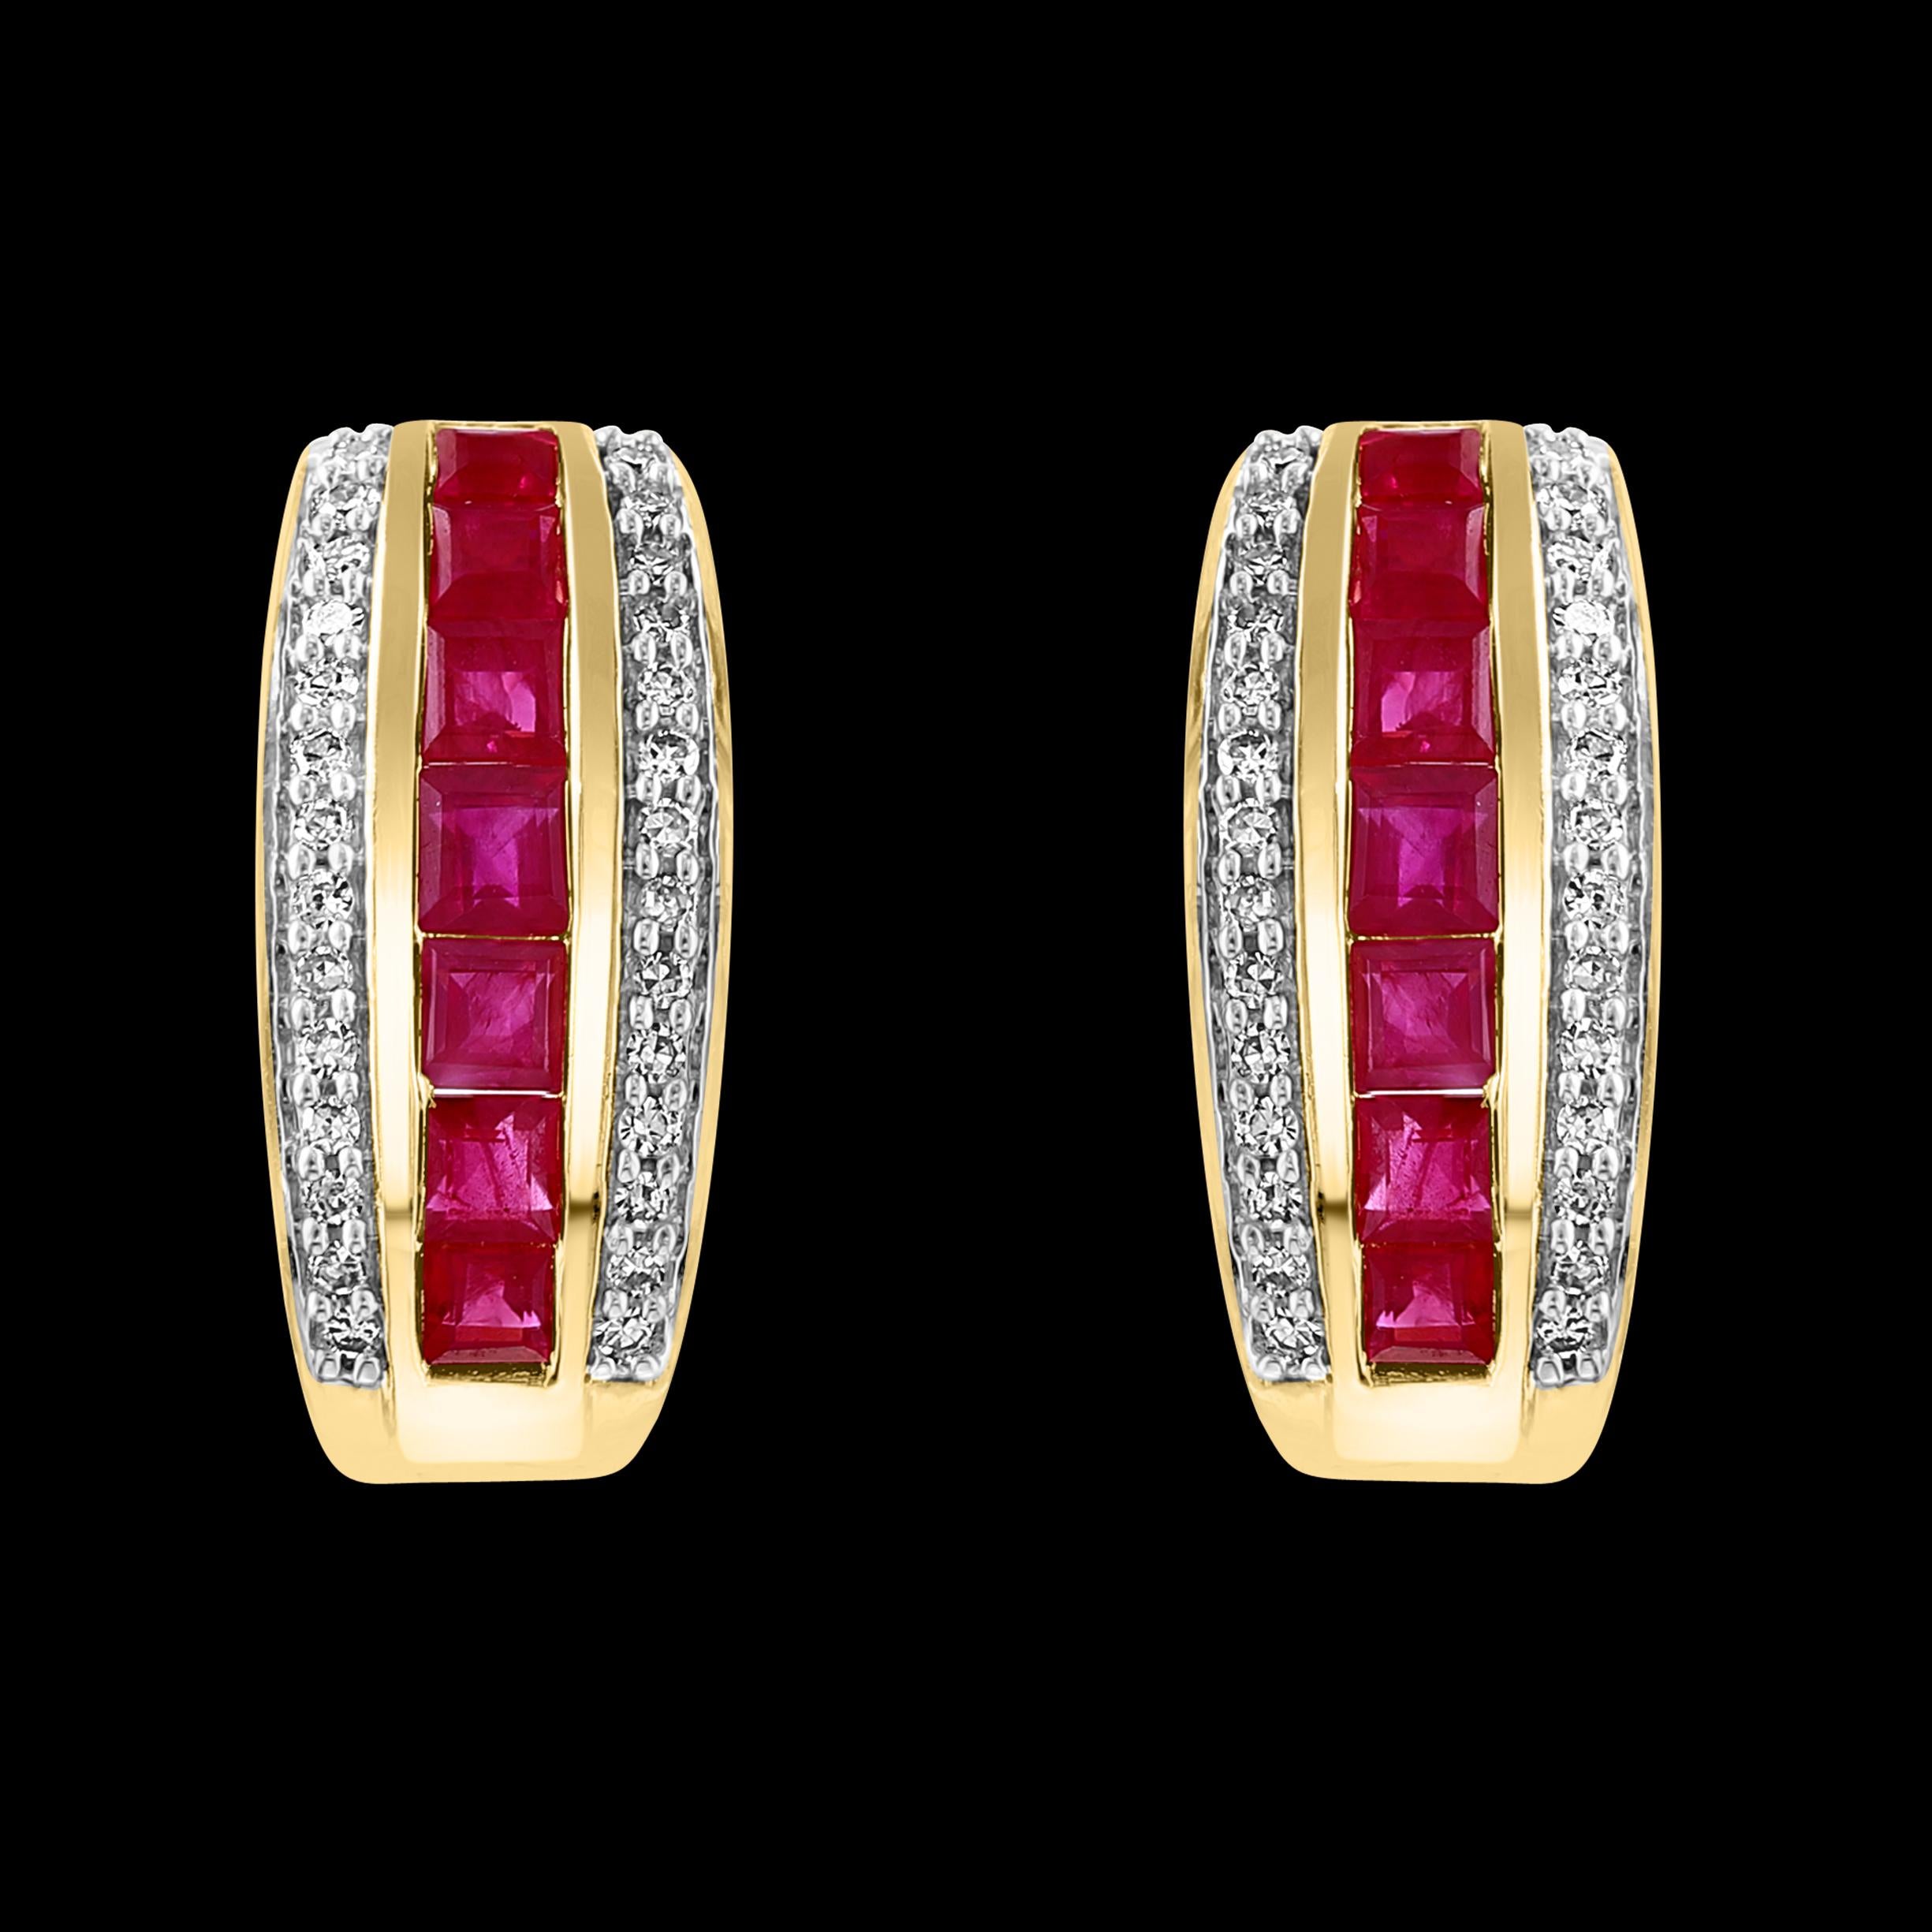 Princess Cut Natural Ruby and Diamond Stud Post Earrings 14 Karat Yellow Gold
This luxurious pair of ruby earrings is designed in 14K Yellow gold. The Princess cut , Invisibly set  red Rubies are surrounded by a dazzling round diamonds.
Natural Ruby